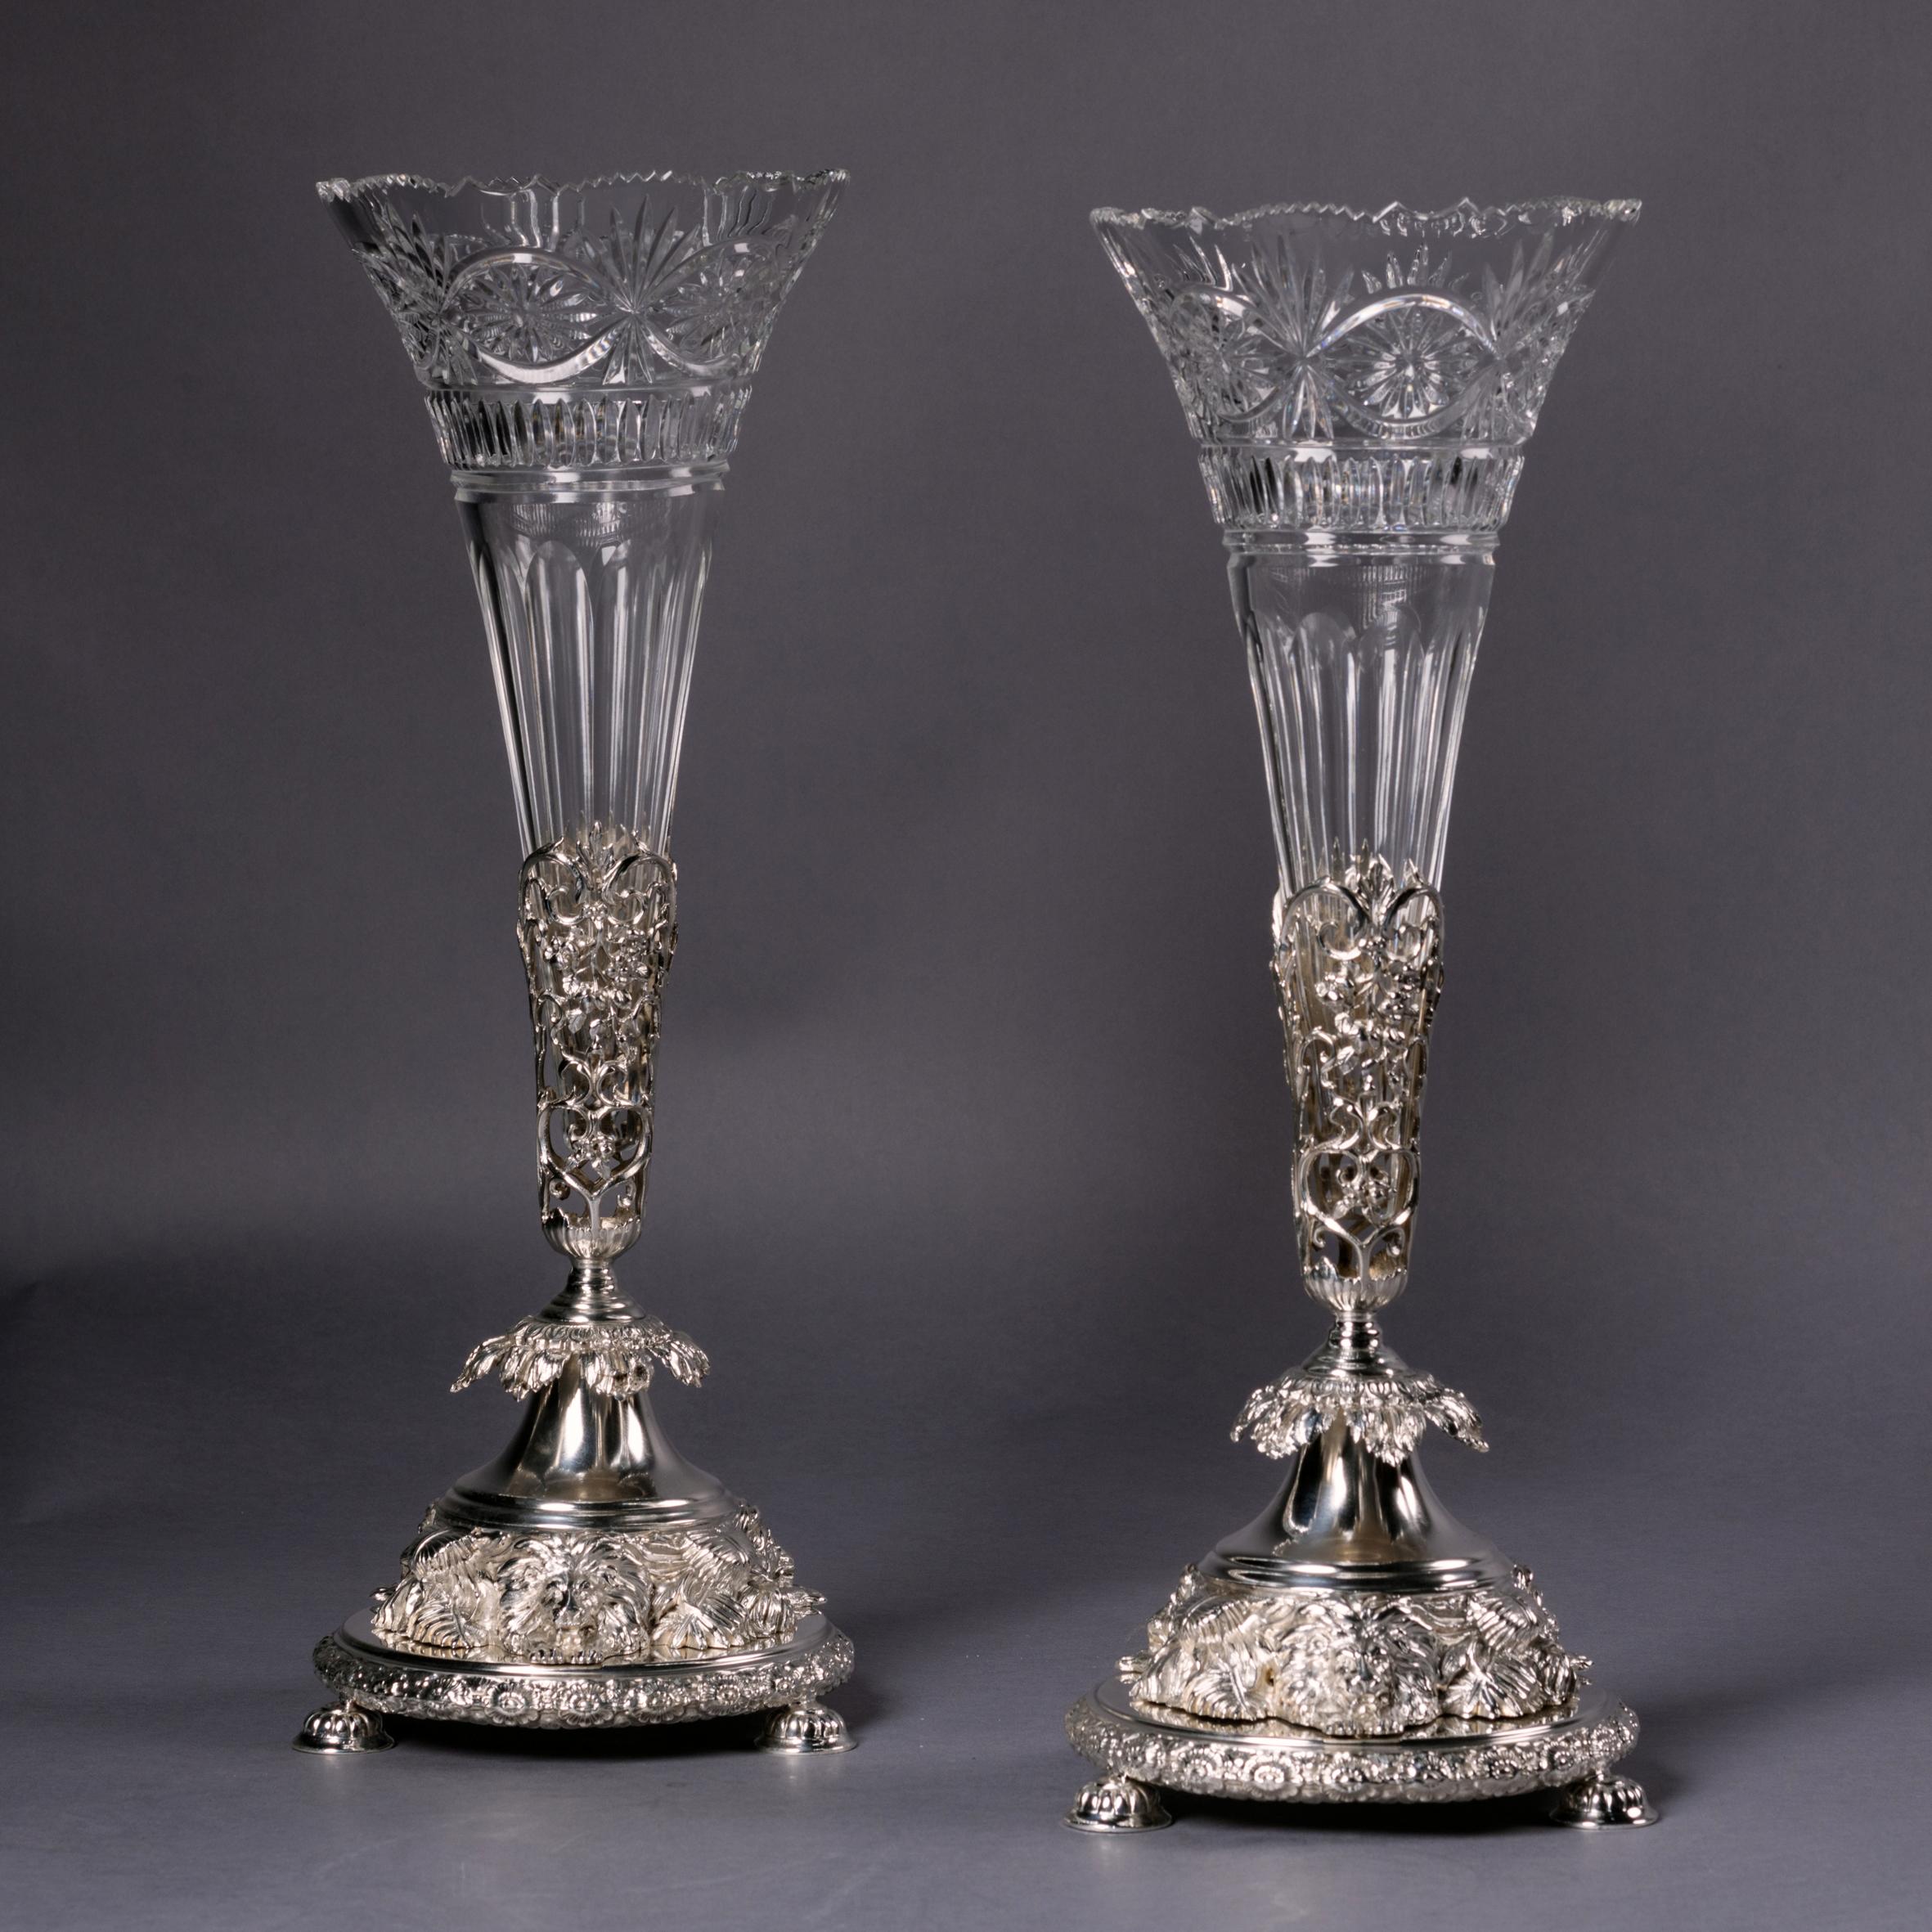 A pair of Victorian silver-plated and cut-glass vases by Joseph Rodgers & Sons. 

With marks for Joseph Rodgers & Son. Sheffield. 

Each vase having a cut-glass trumpet stem, the circular bases on openwork acanthus feet and lion-head supports